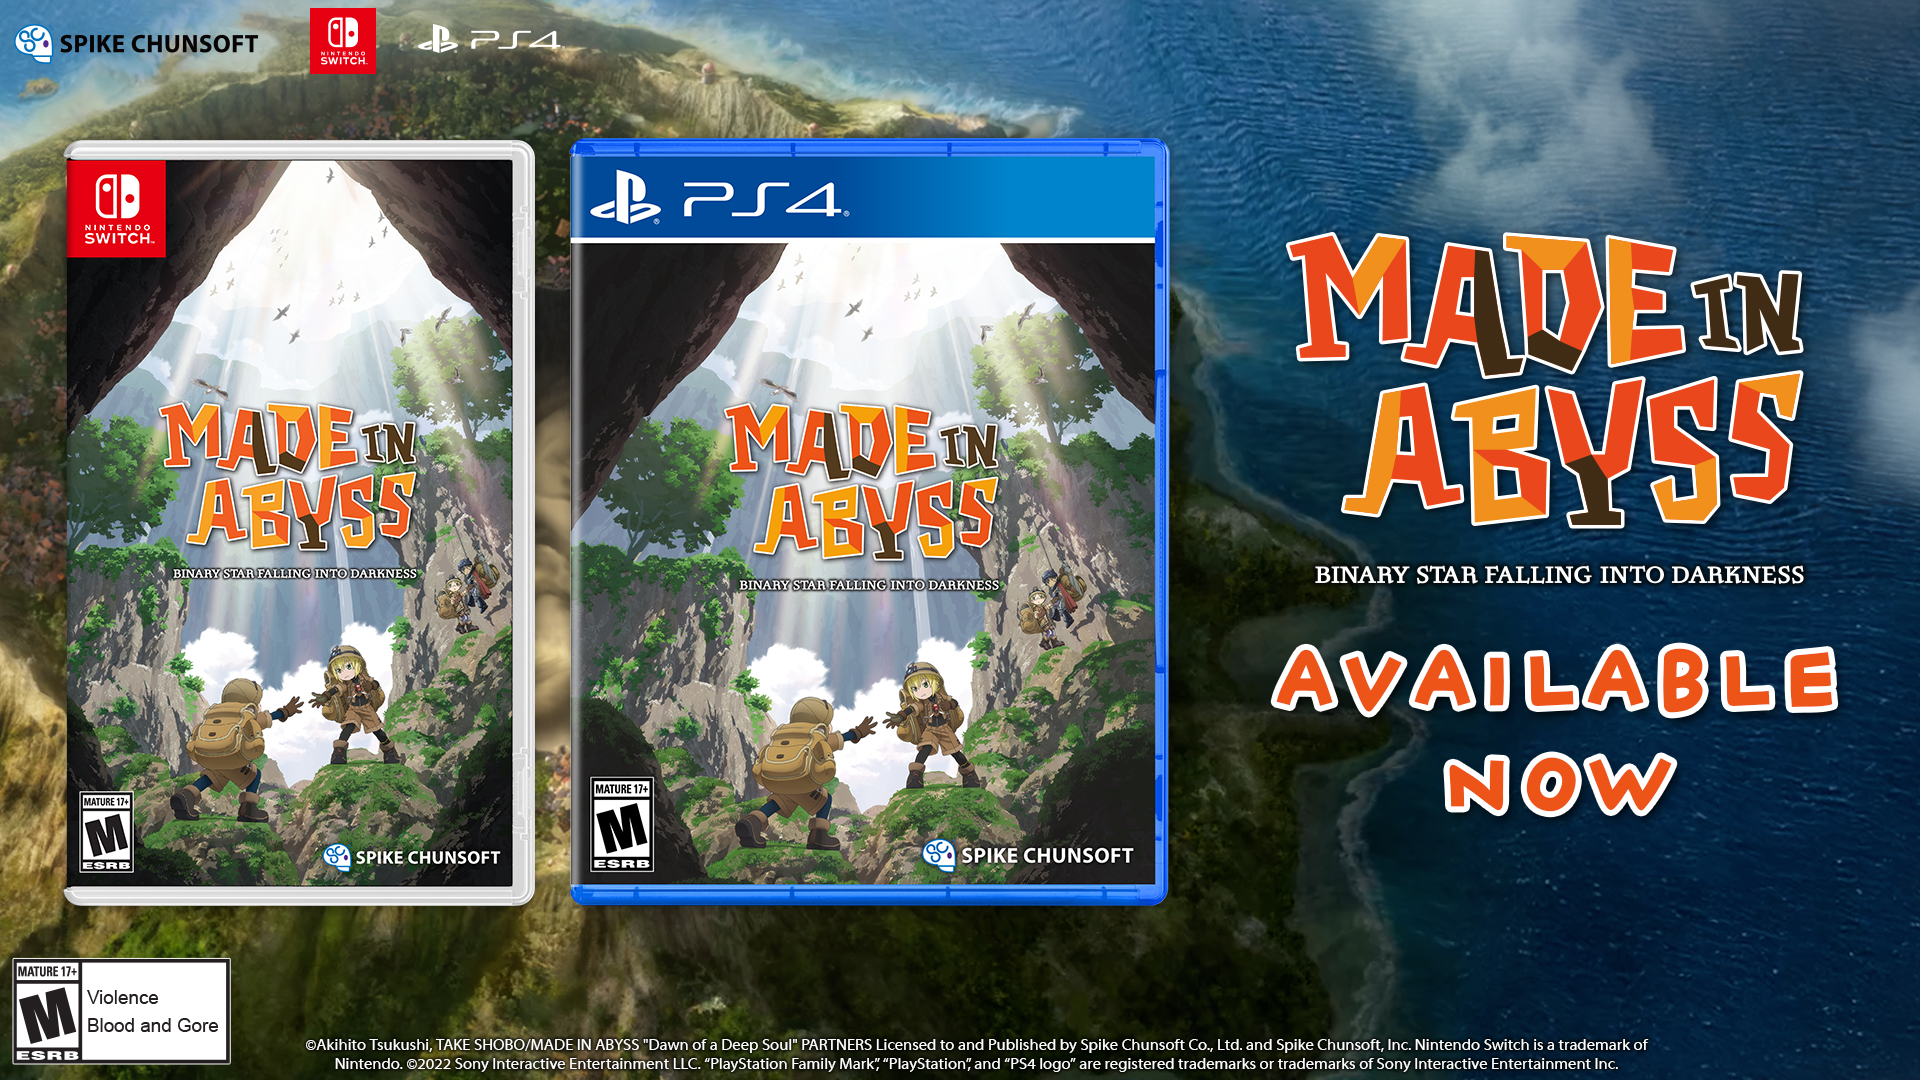 Made in Abyss: Binary Star Falling into Darkness - Nintendo Switch, Nintendo Switch